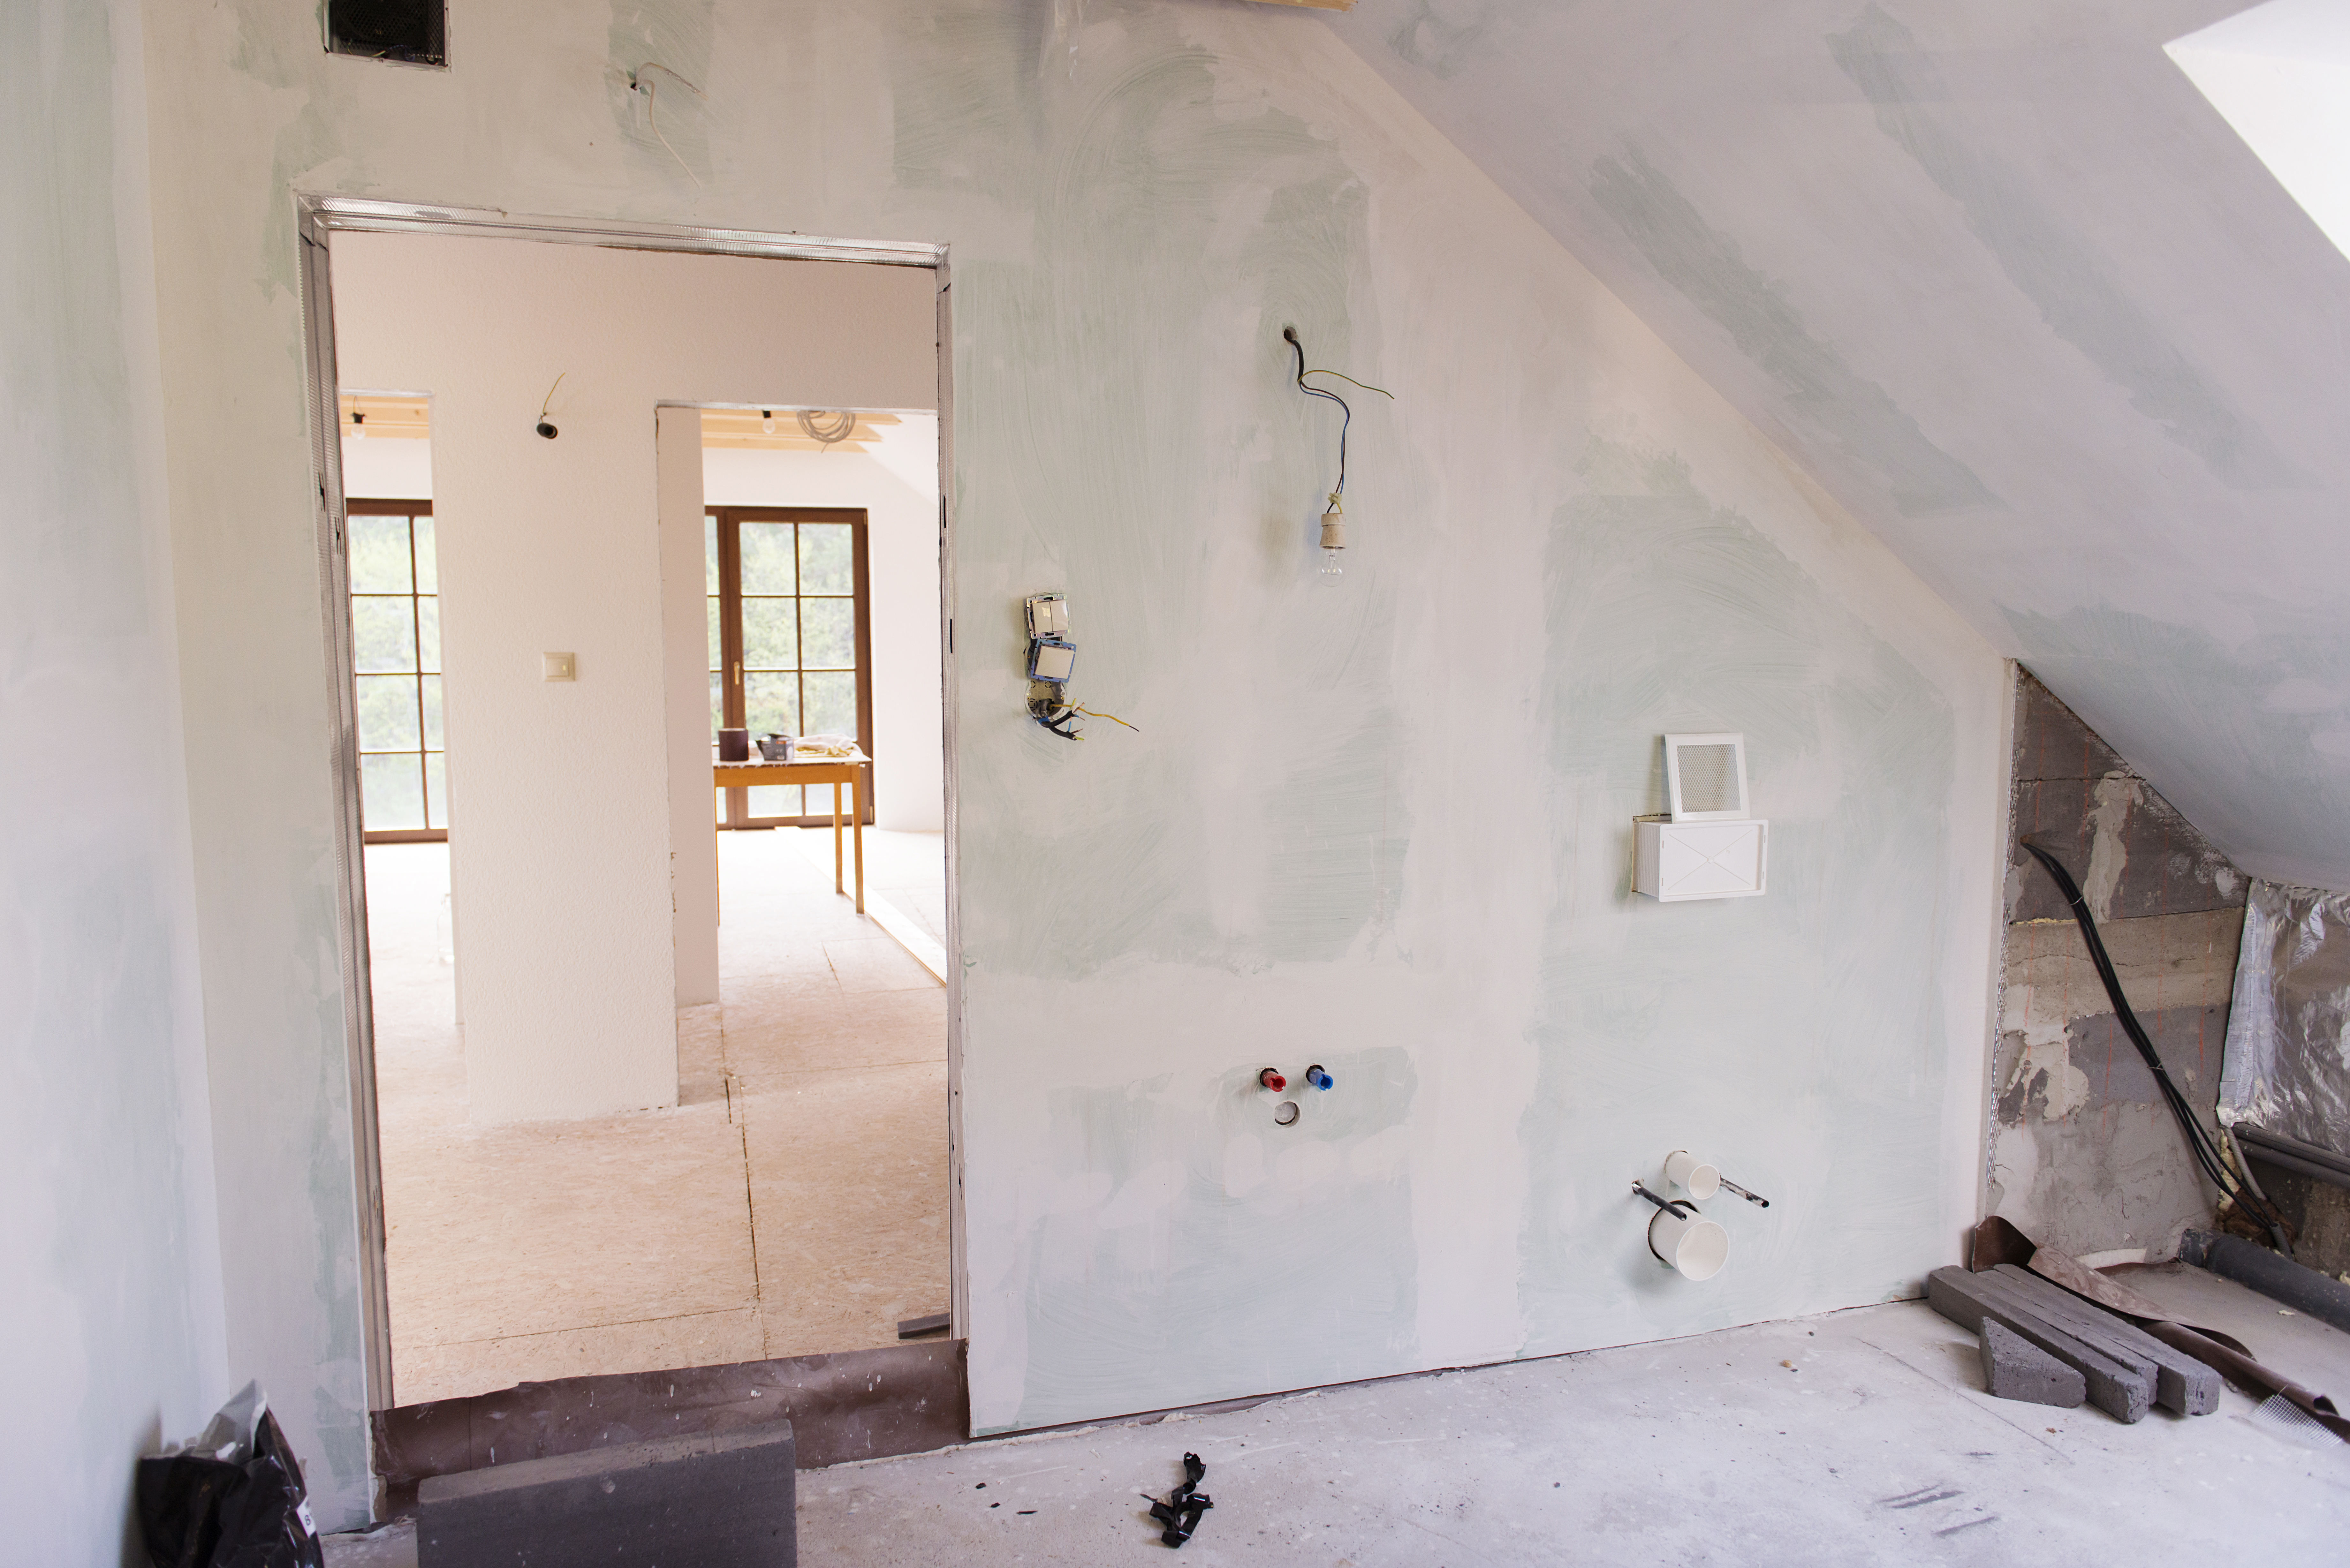 Do You Need a Permit to Remodel a Bathroom in NJ?